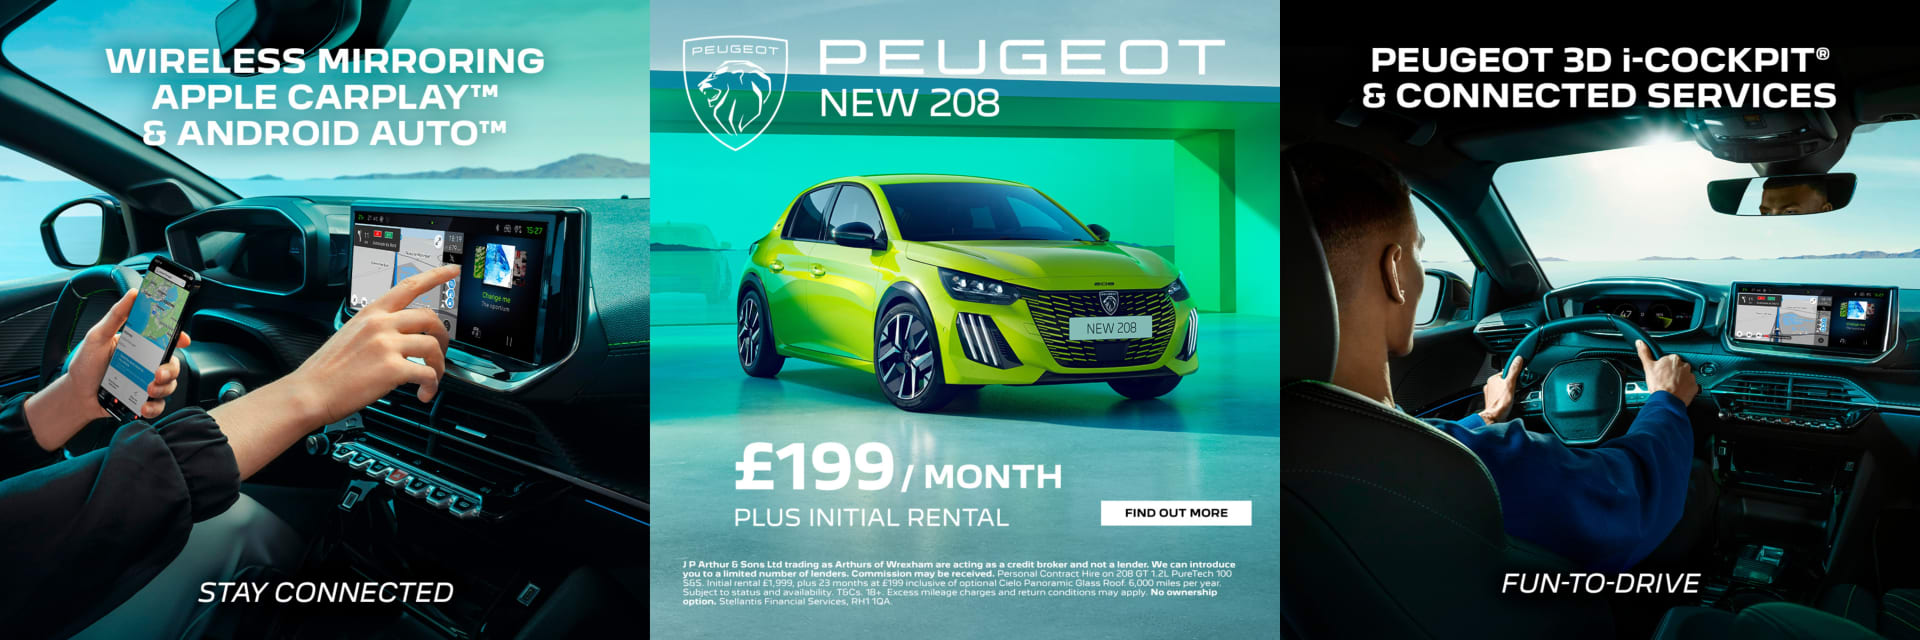 NEW 208 FROM ONLY £199*